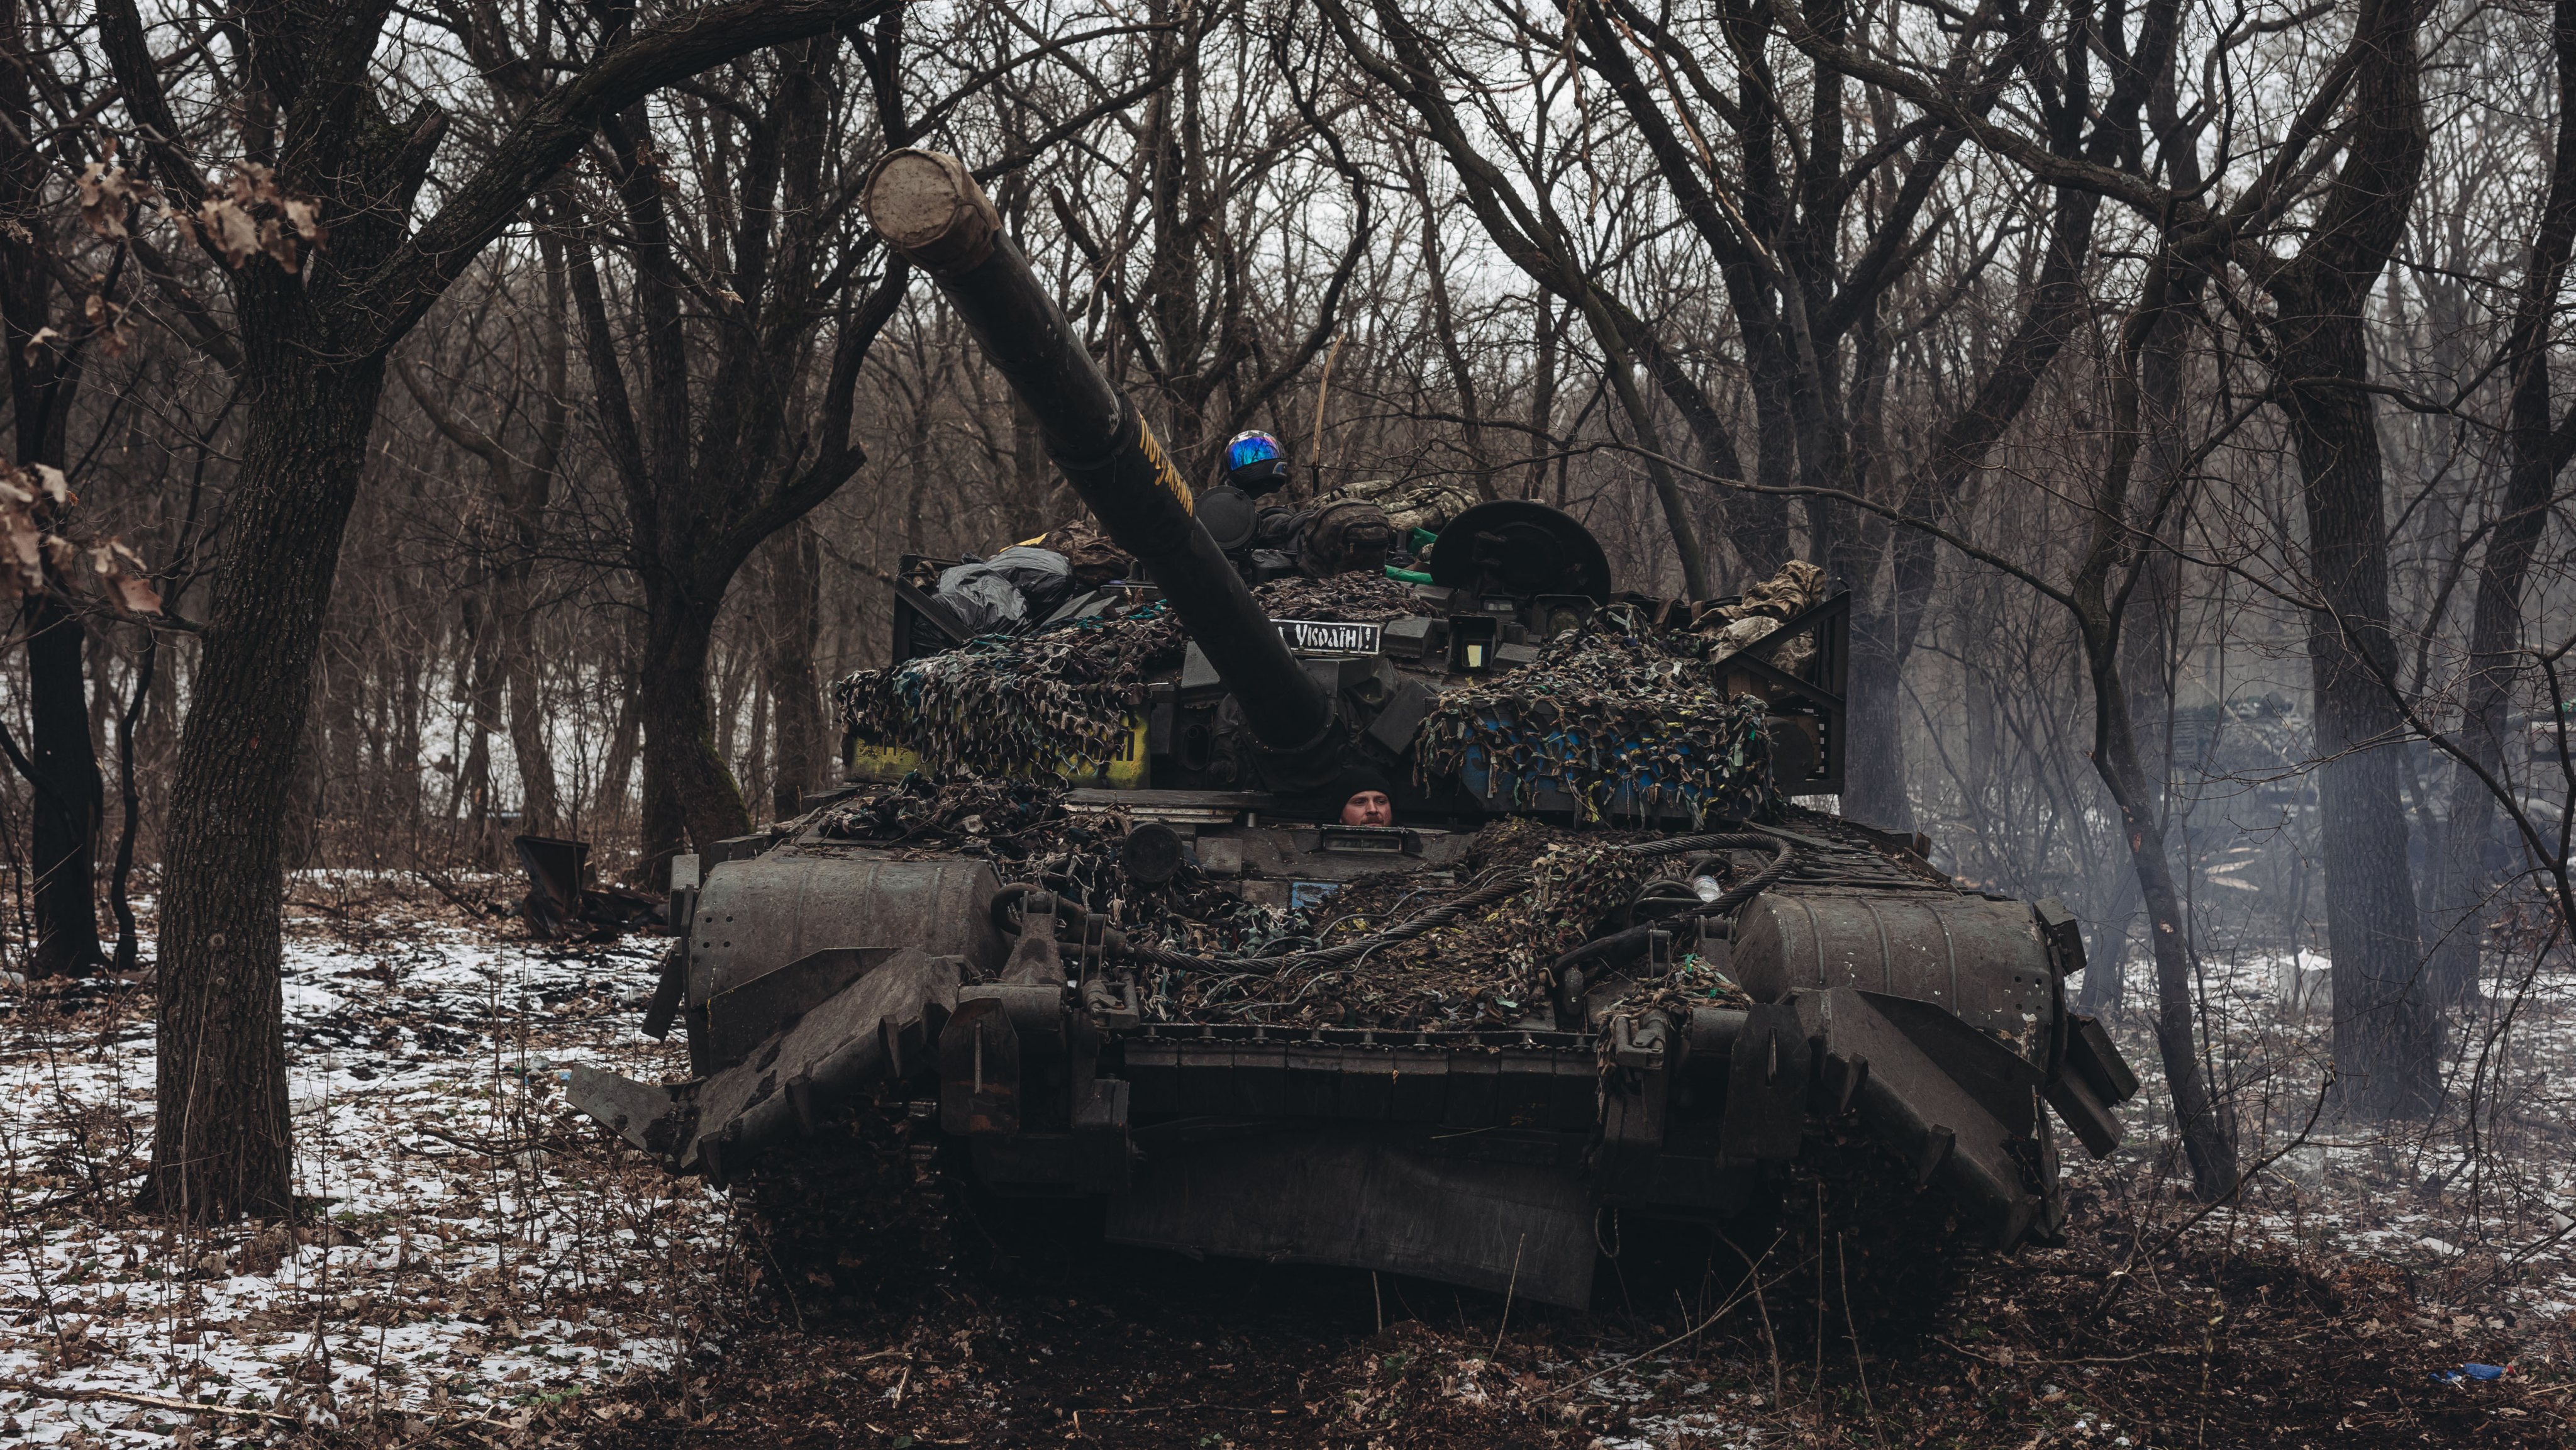 Military mobility continues on the Donbass frontline in Ukraine